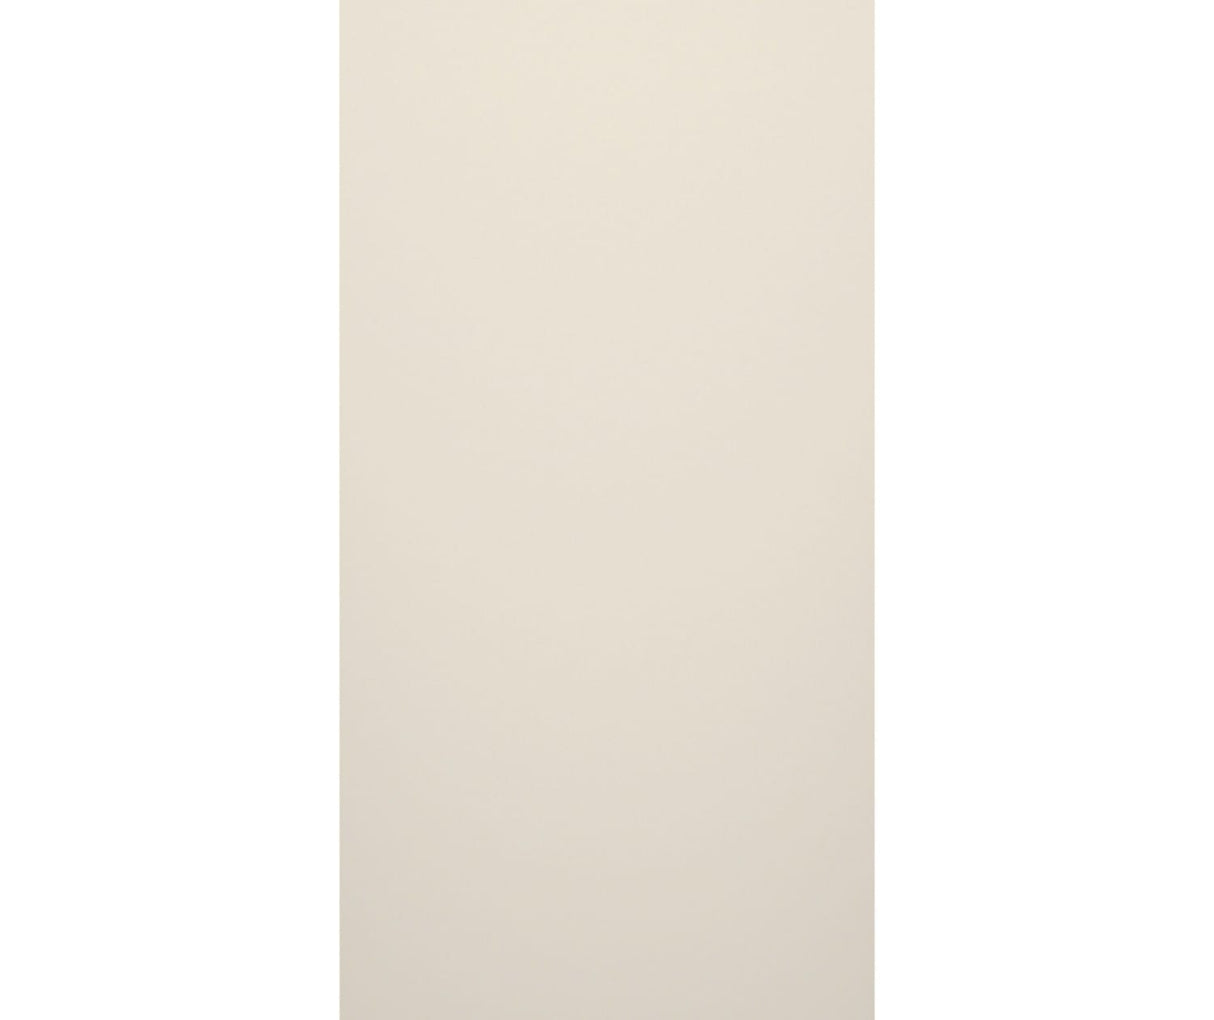 Swanstone SMMK-7234-1 34 x 72 Swanstone Smooth Tile Glue up Bathtub and Shower Single Wall Panel in Bisque SMMK7234.018